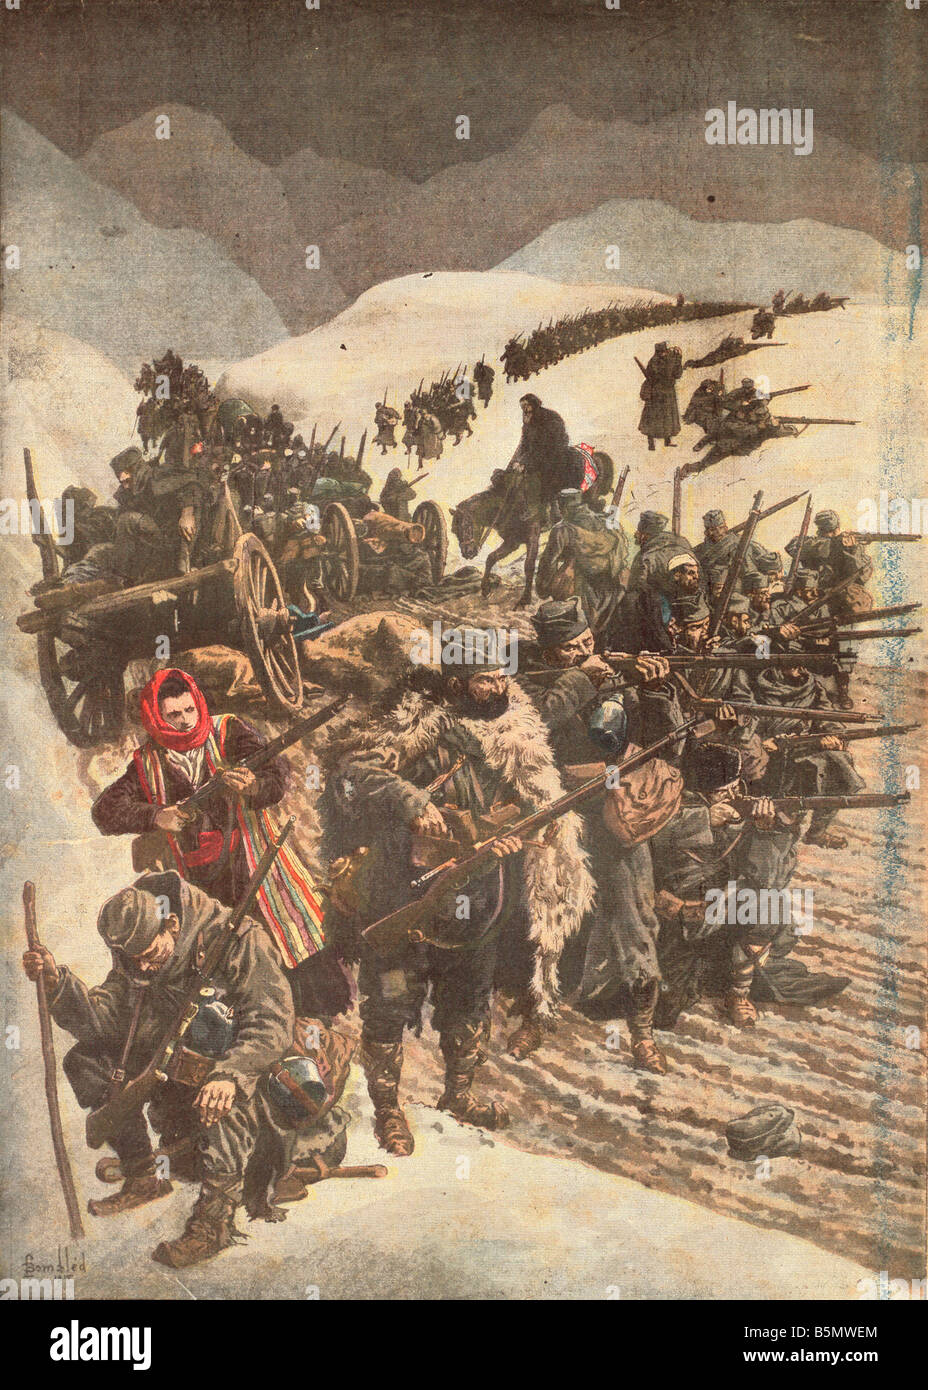 9JG 1915 12 0 A1 E Serbian Refugees 1915 Petit Journal World War I 2nd Serbia Expedition by the Central Powers Germany Austria H Stock Photo